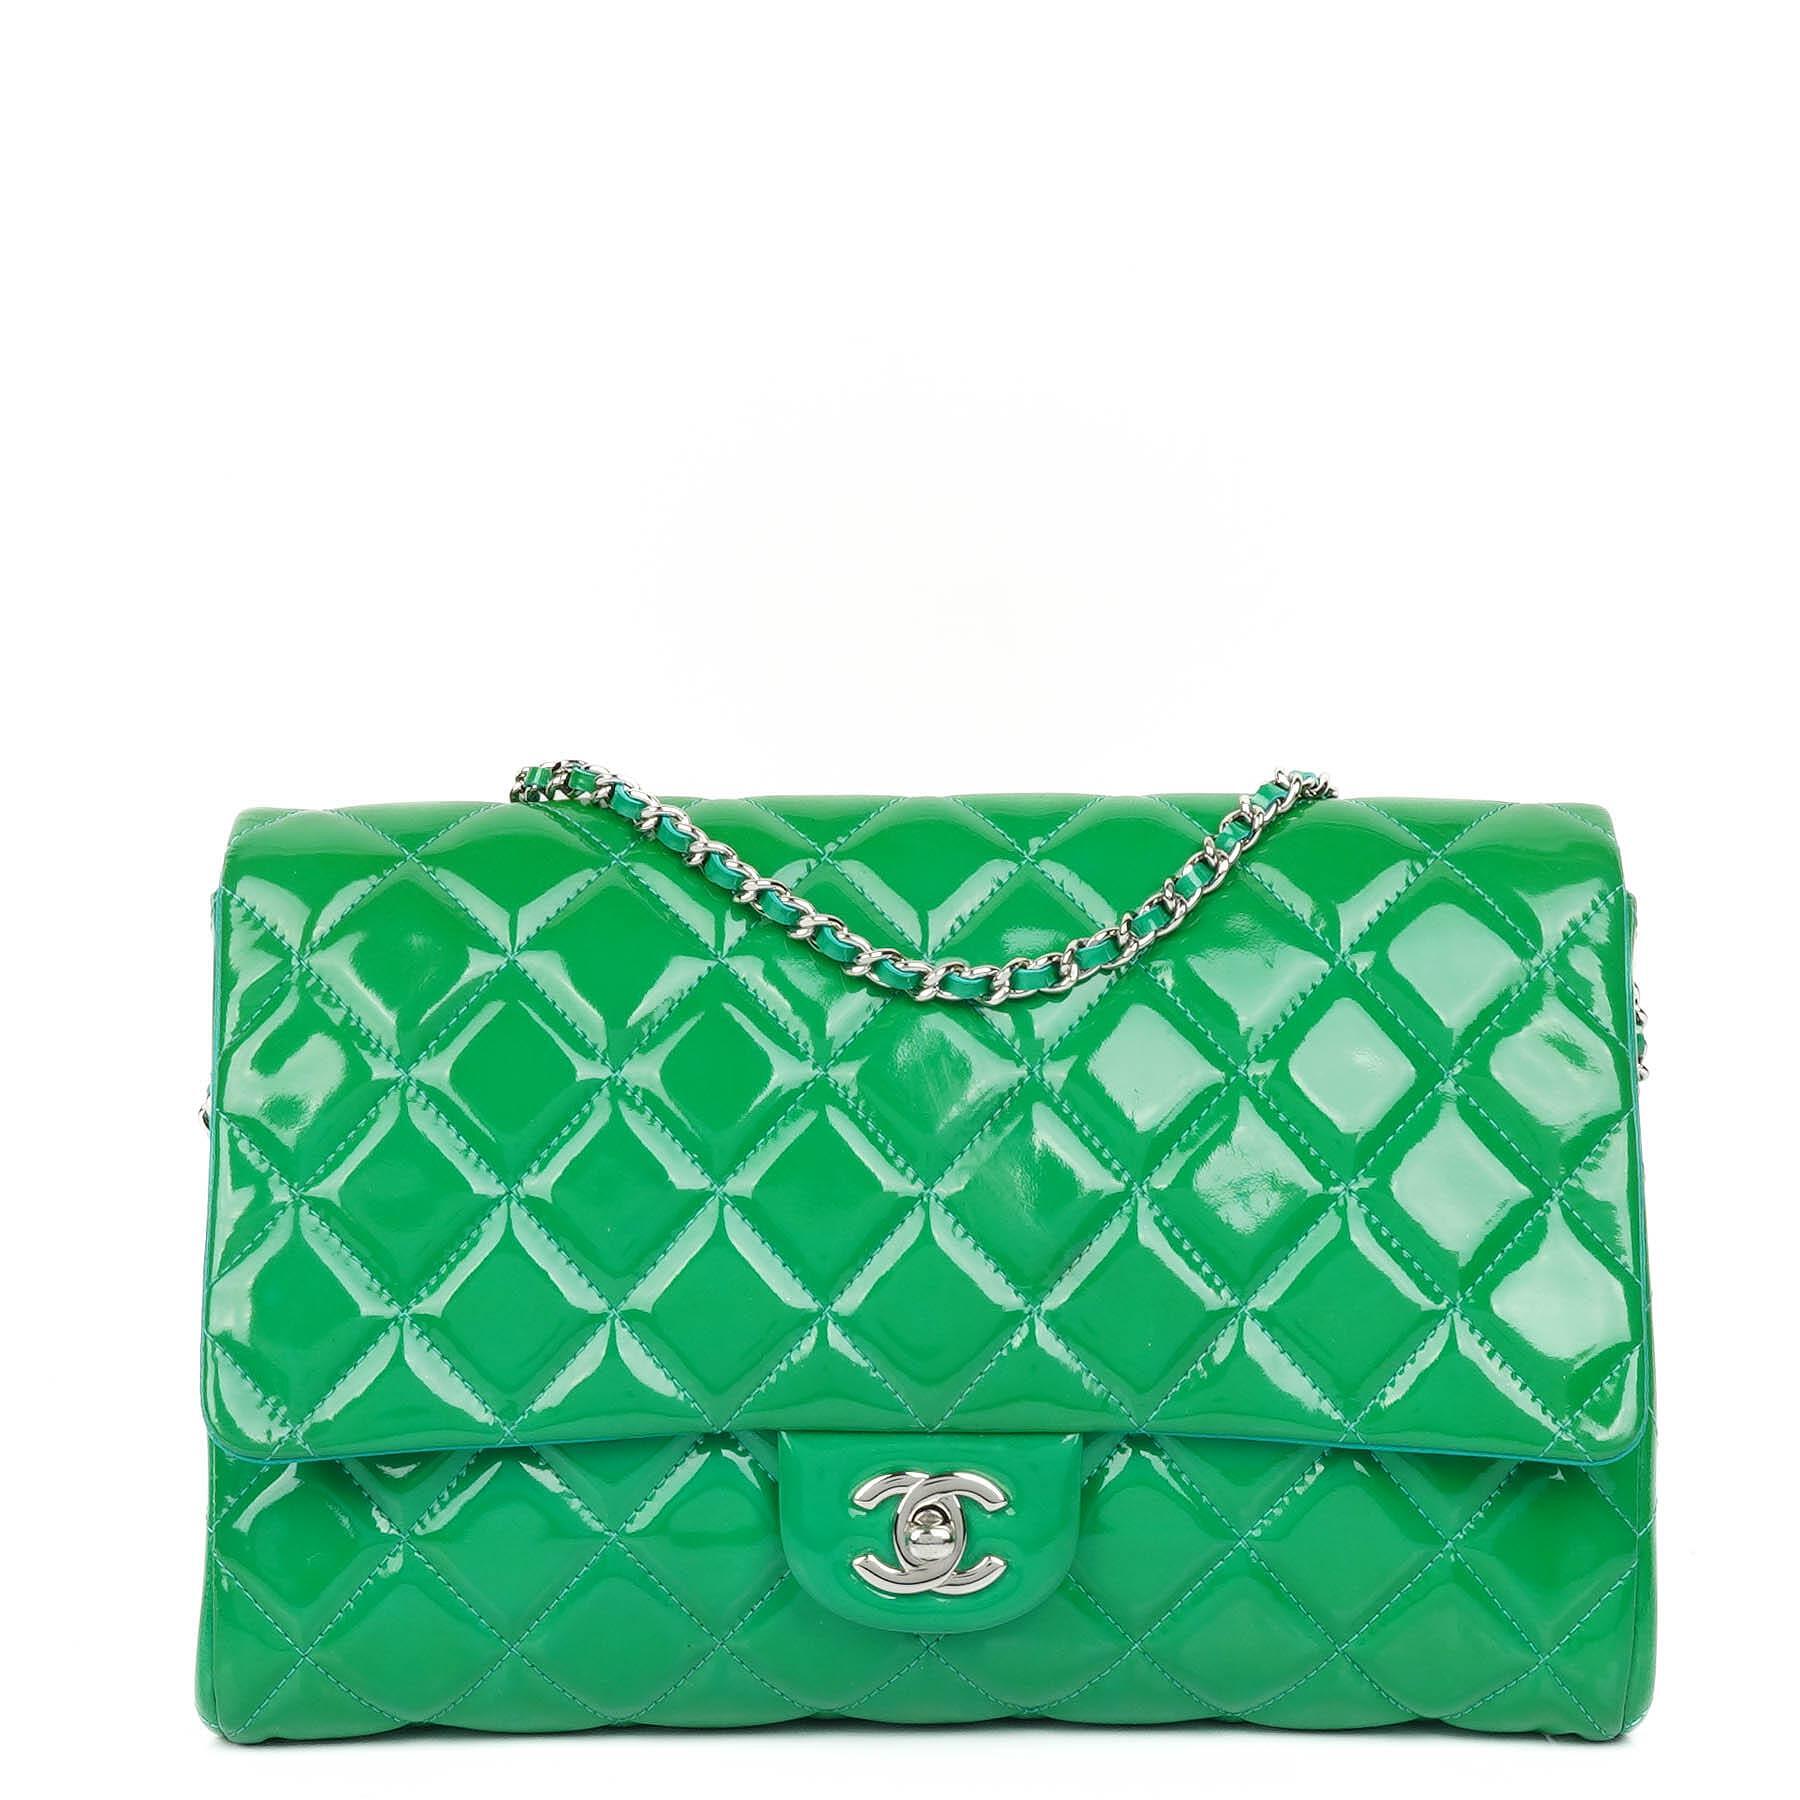 Chanel Green Quilted Patent Leather Classic Flap Bag With Silver Hardware